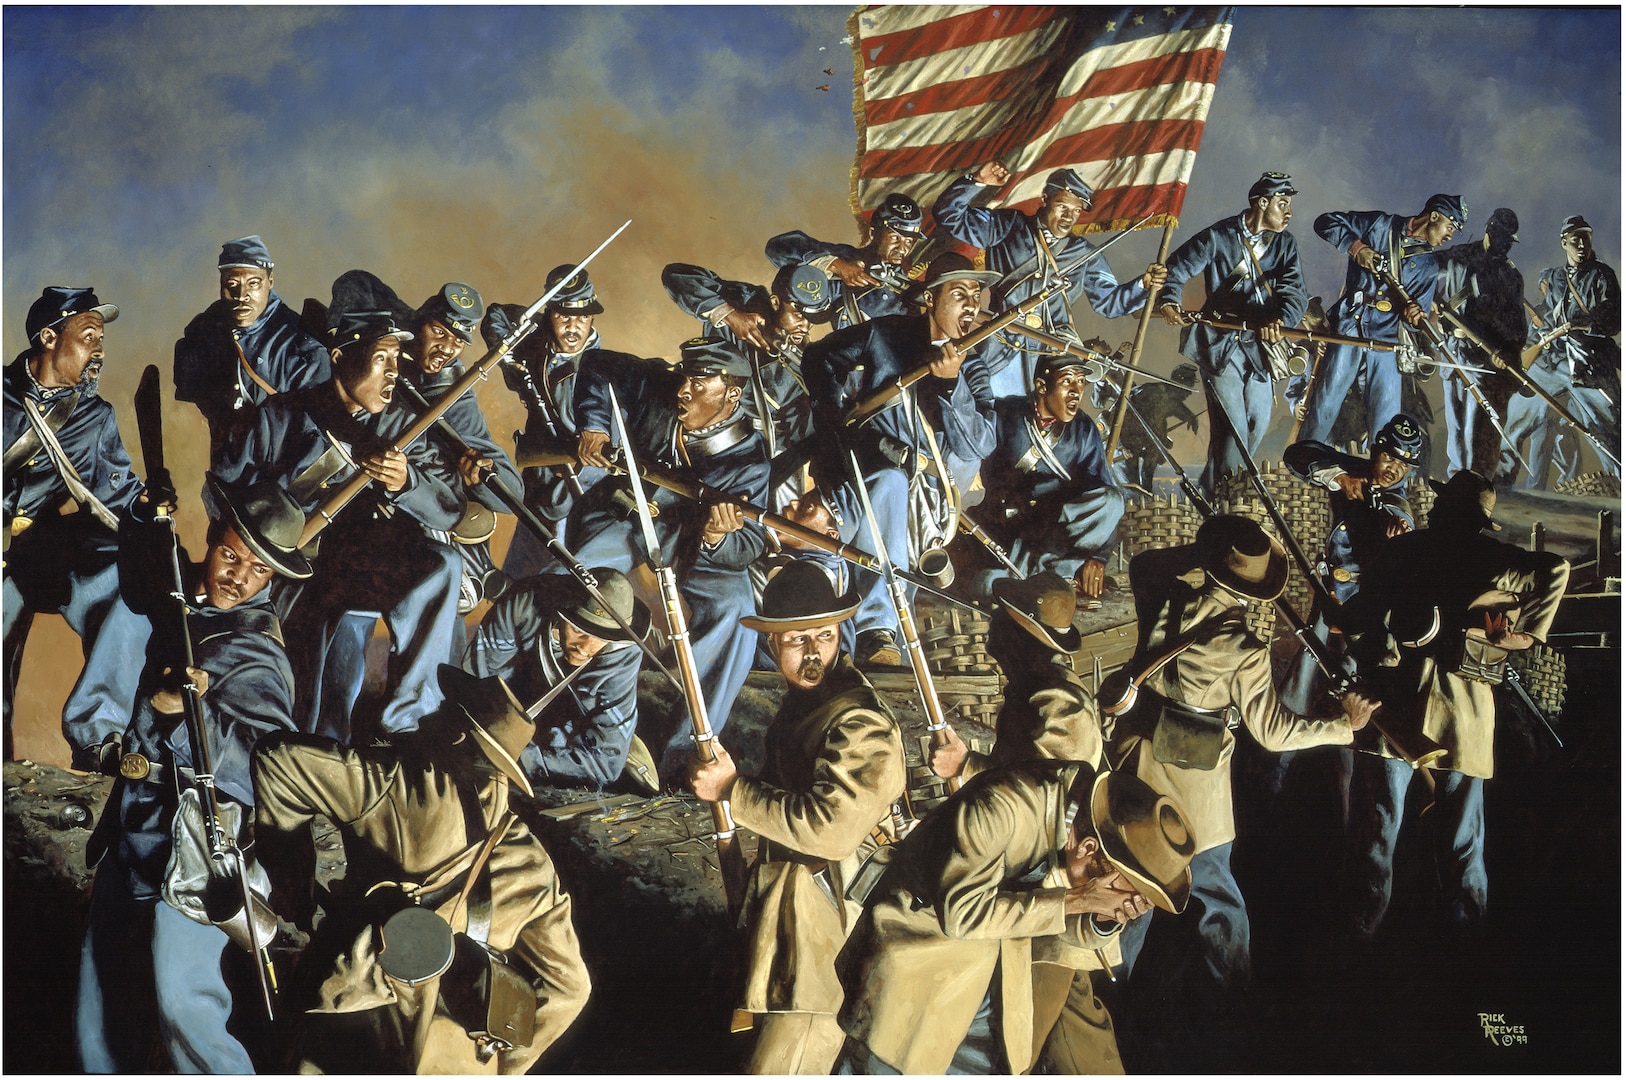 The 54th Massachusetts Volunteer Infantry Regiment, a fighting force of African-American Soldiers, fought valiantly in the 1863 battle at Fort Wagner, S.C., shown in this painting. About 180,000 African-American Soldiers followed in their footsteps. (The Old Flag Never Touched the Ground by Rick Reeves)